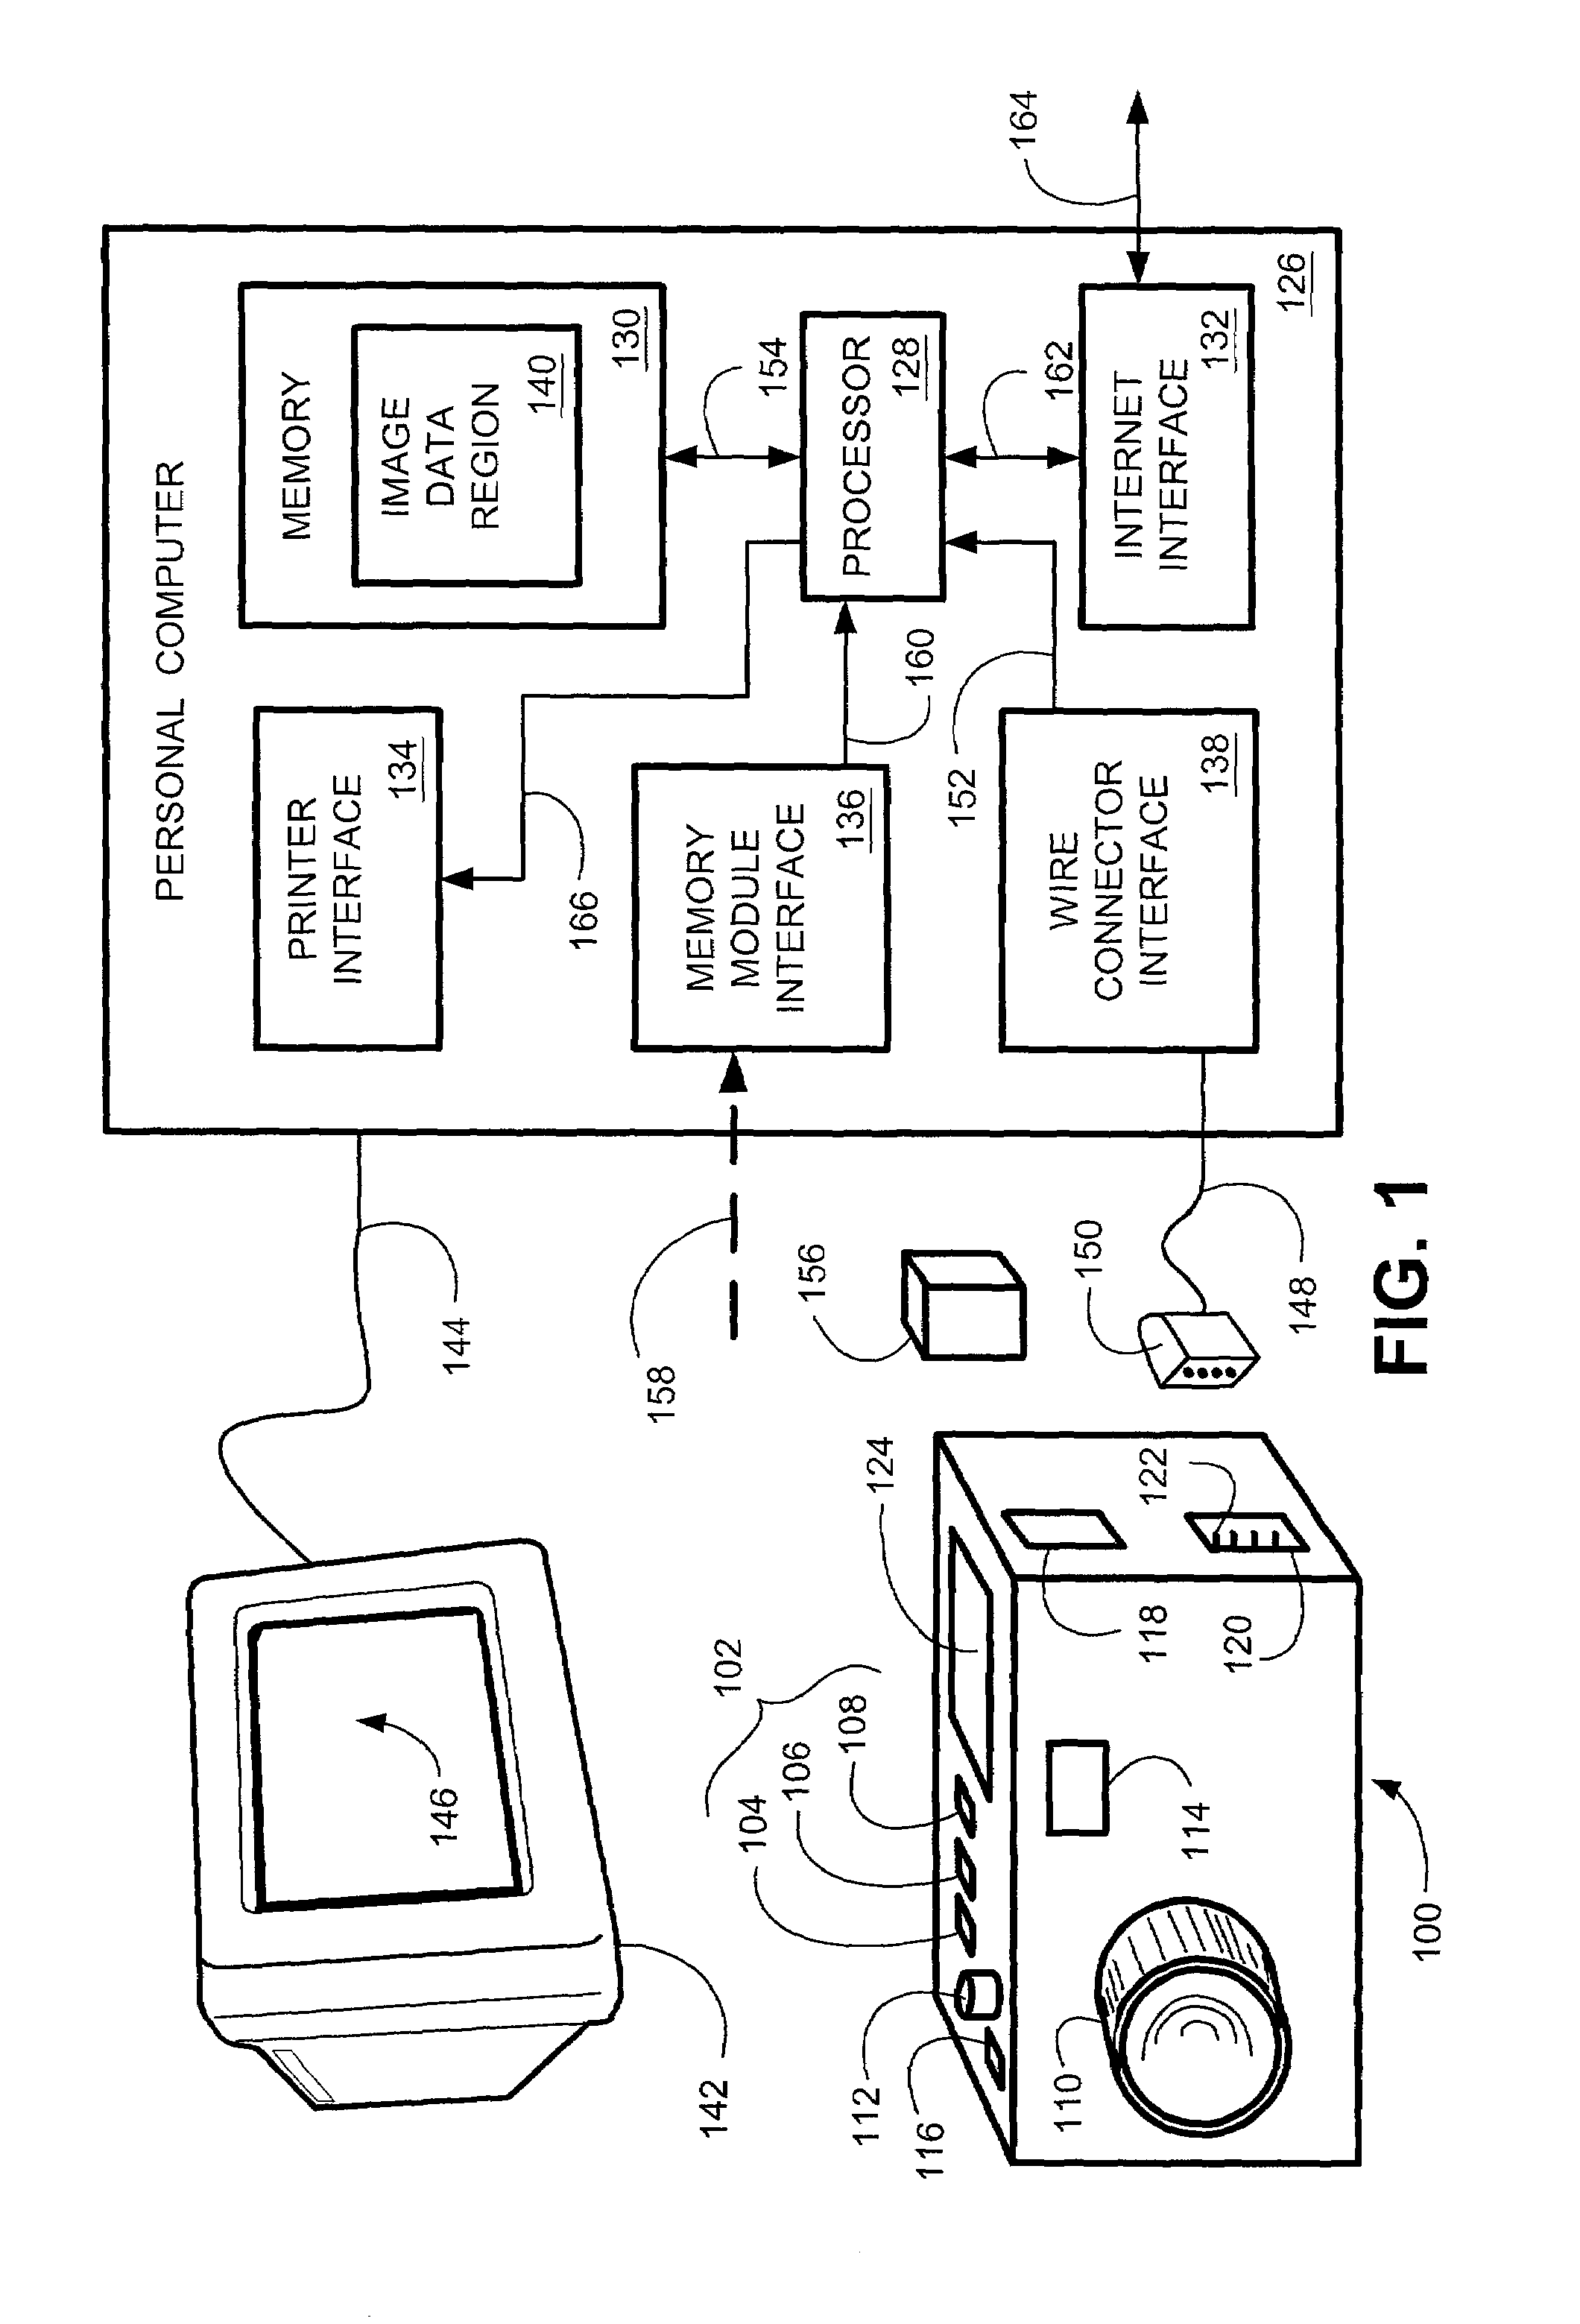 System and method for a simplified digital camera interface for viewing images and controlling camera operation